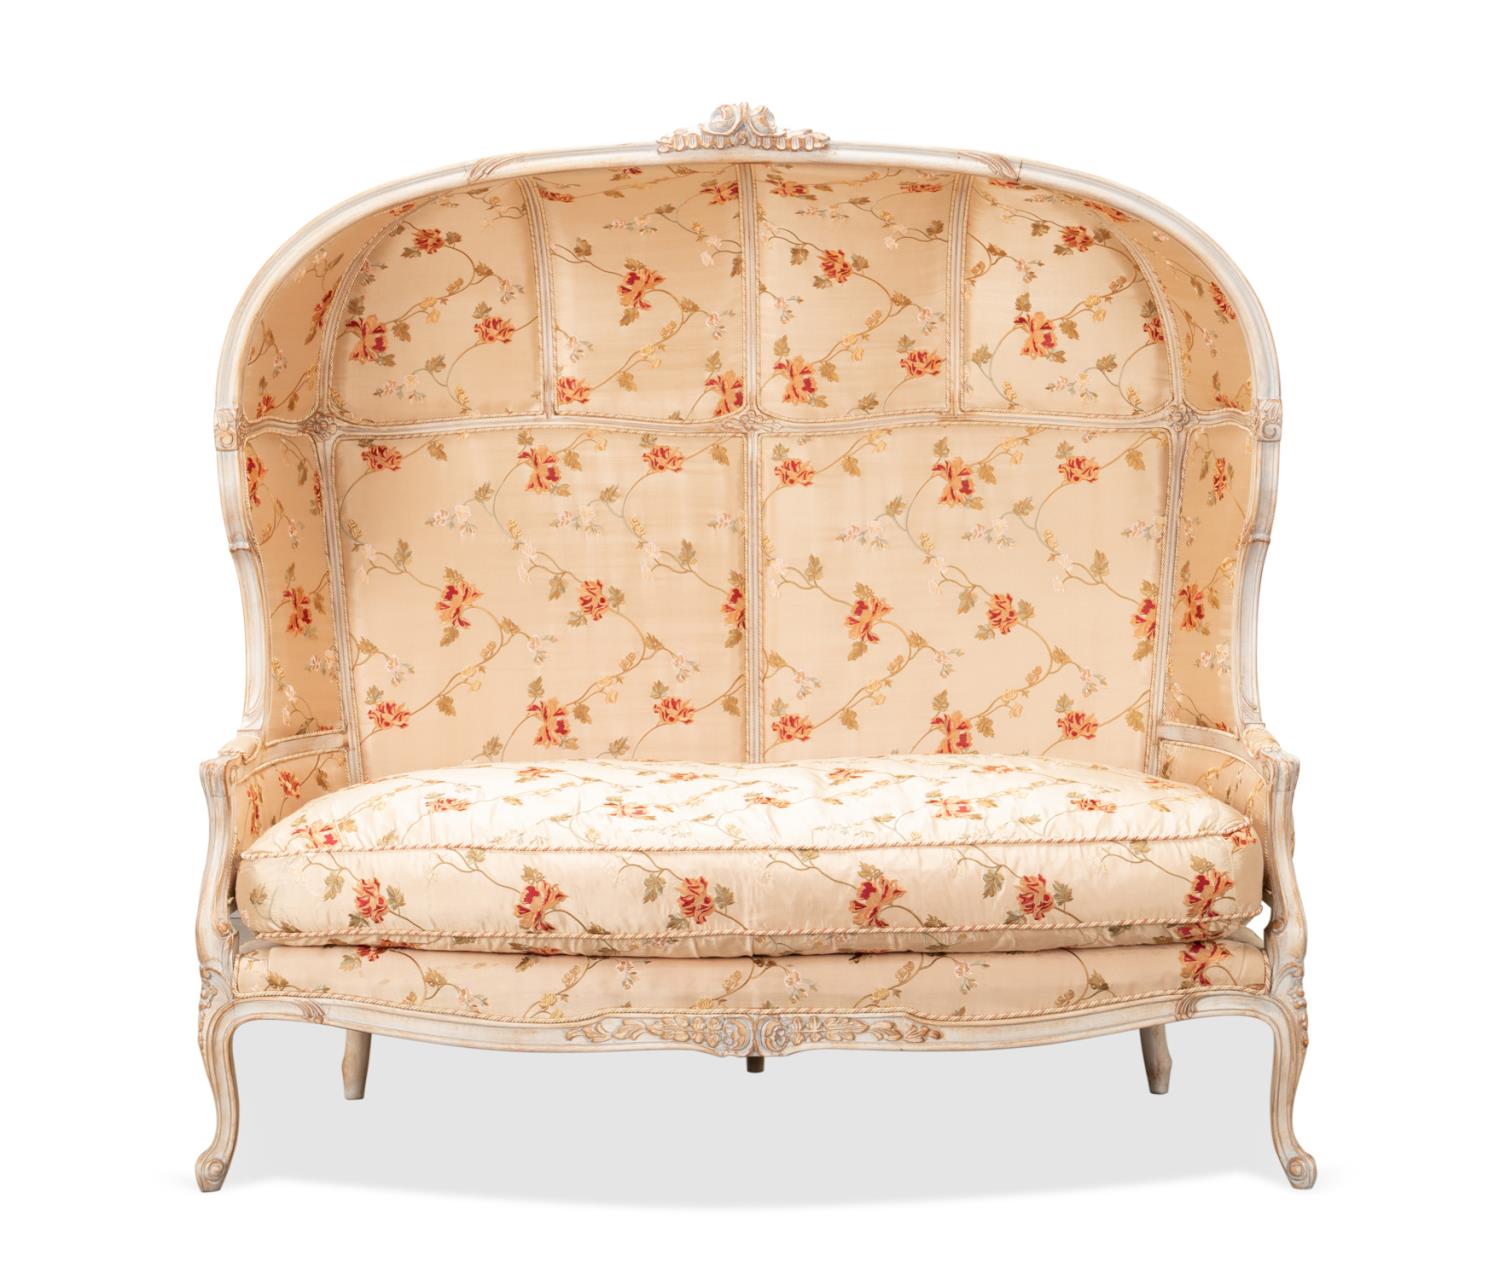 LOUIS XV STYLE SILK UPHOLSTERED